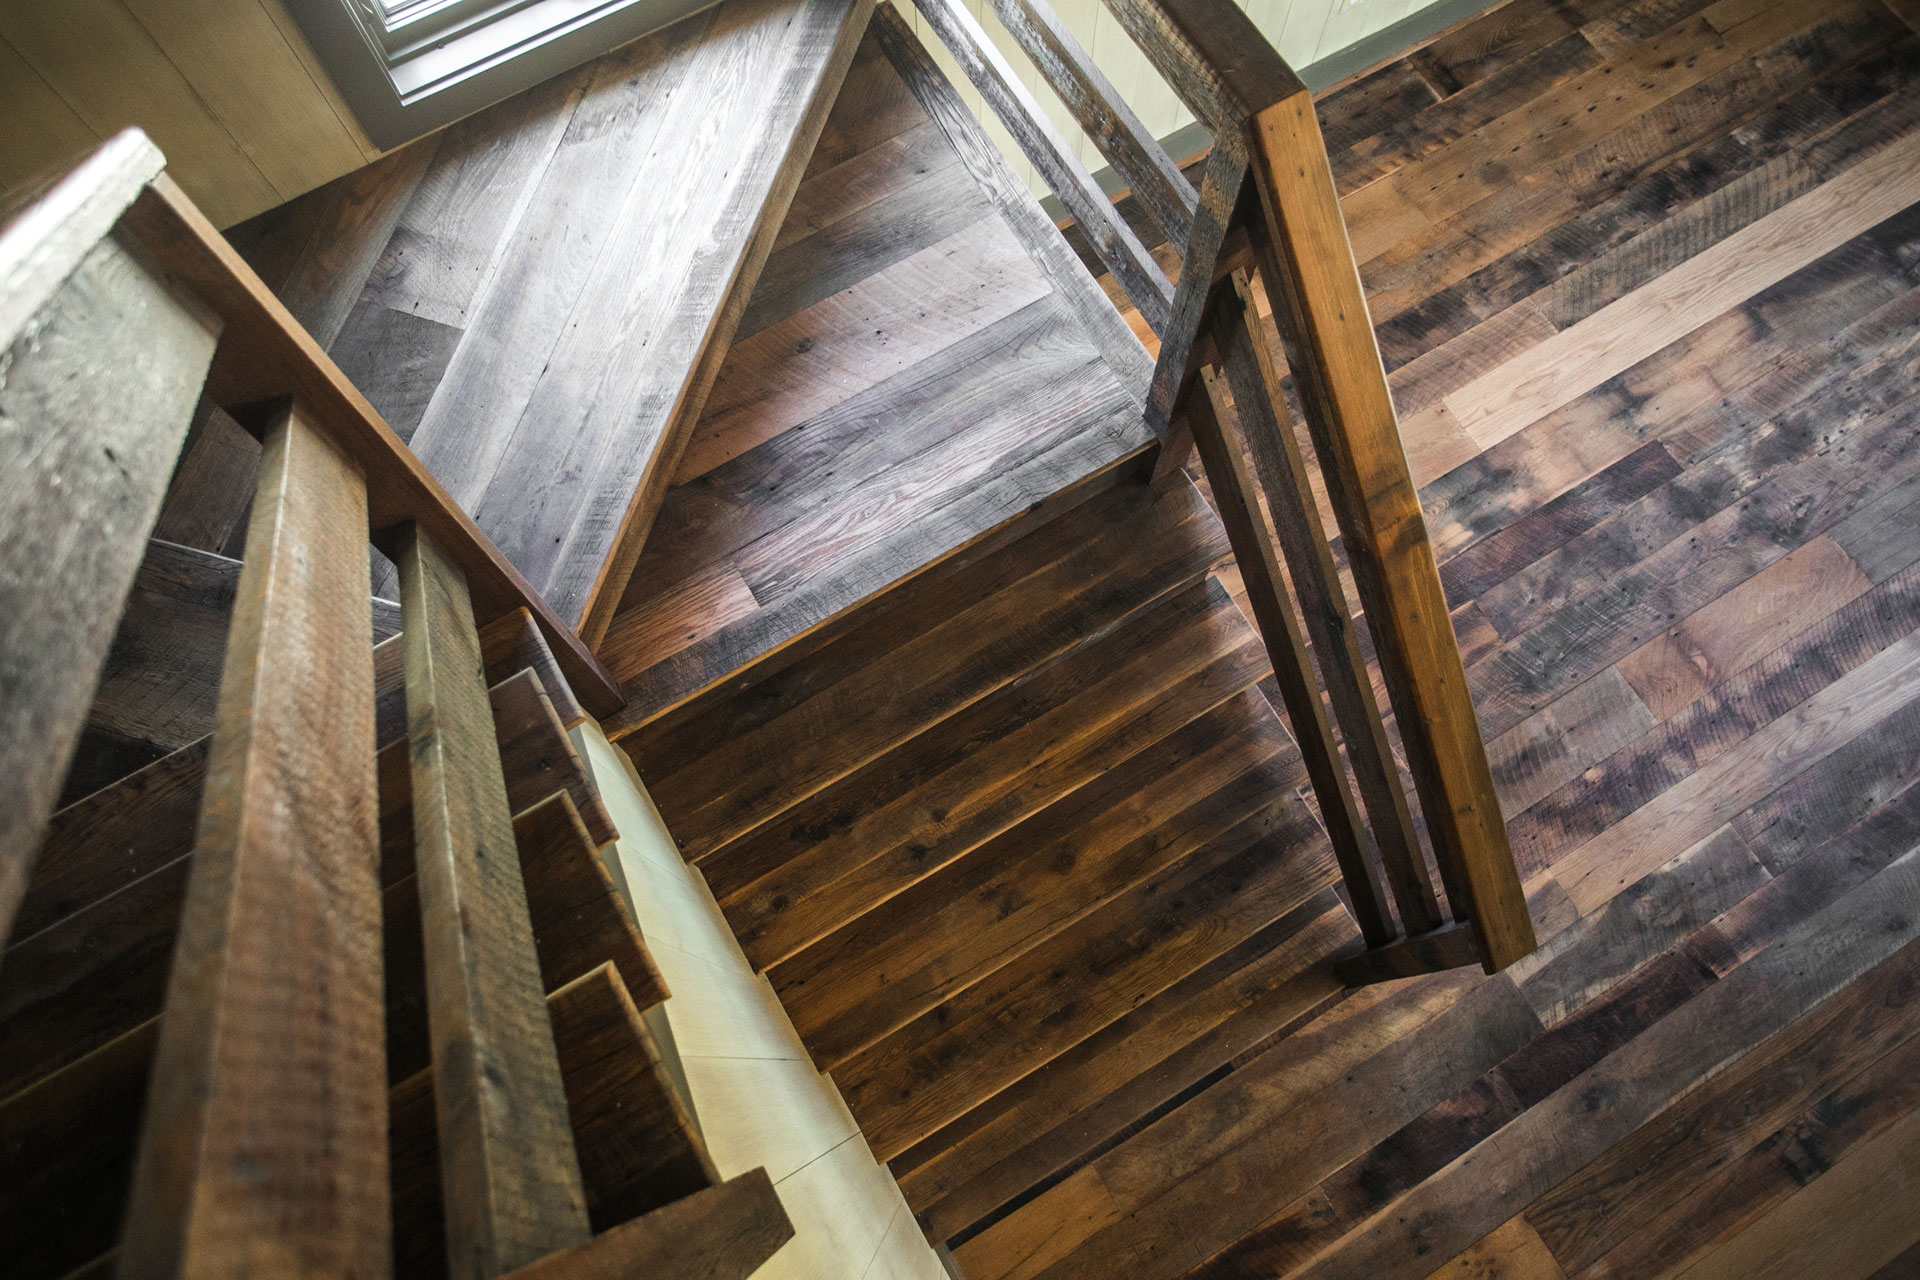 Antique Oak Distressed Stairs & Flooring - Miller and Blackwell Barn